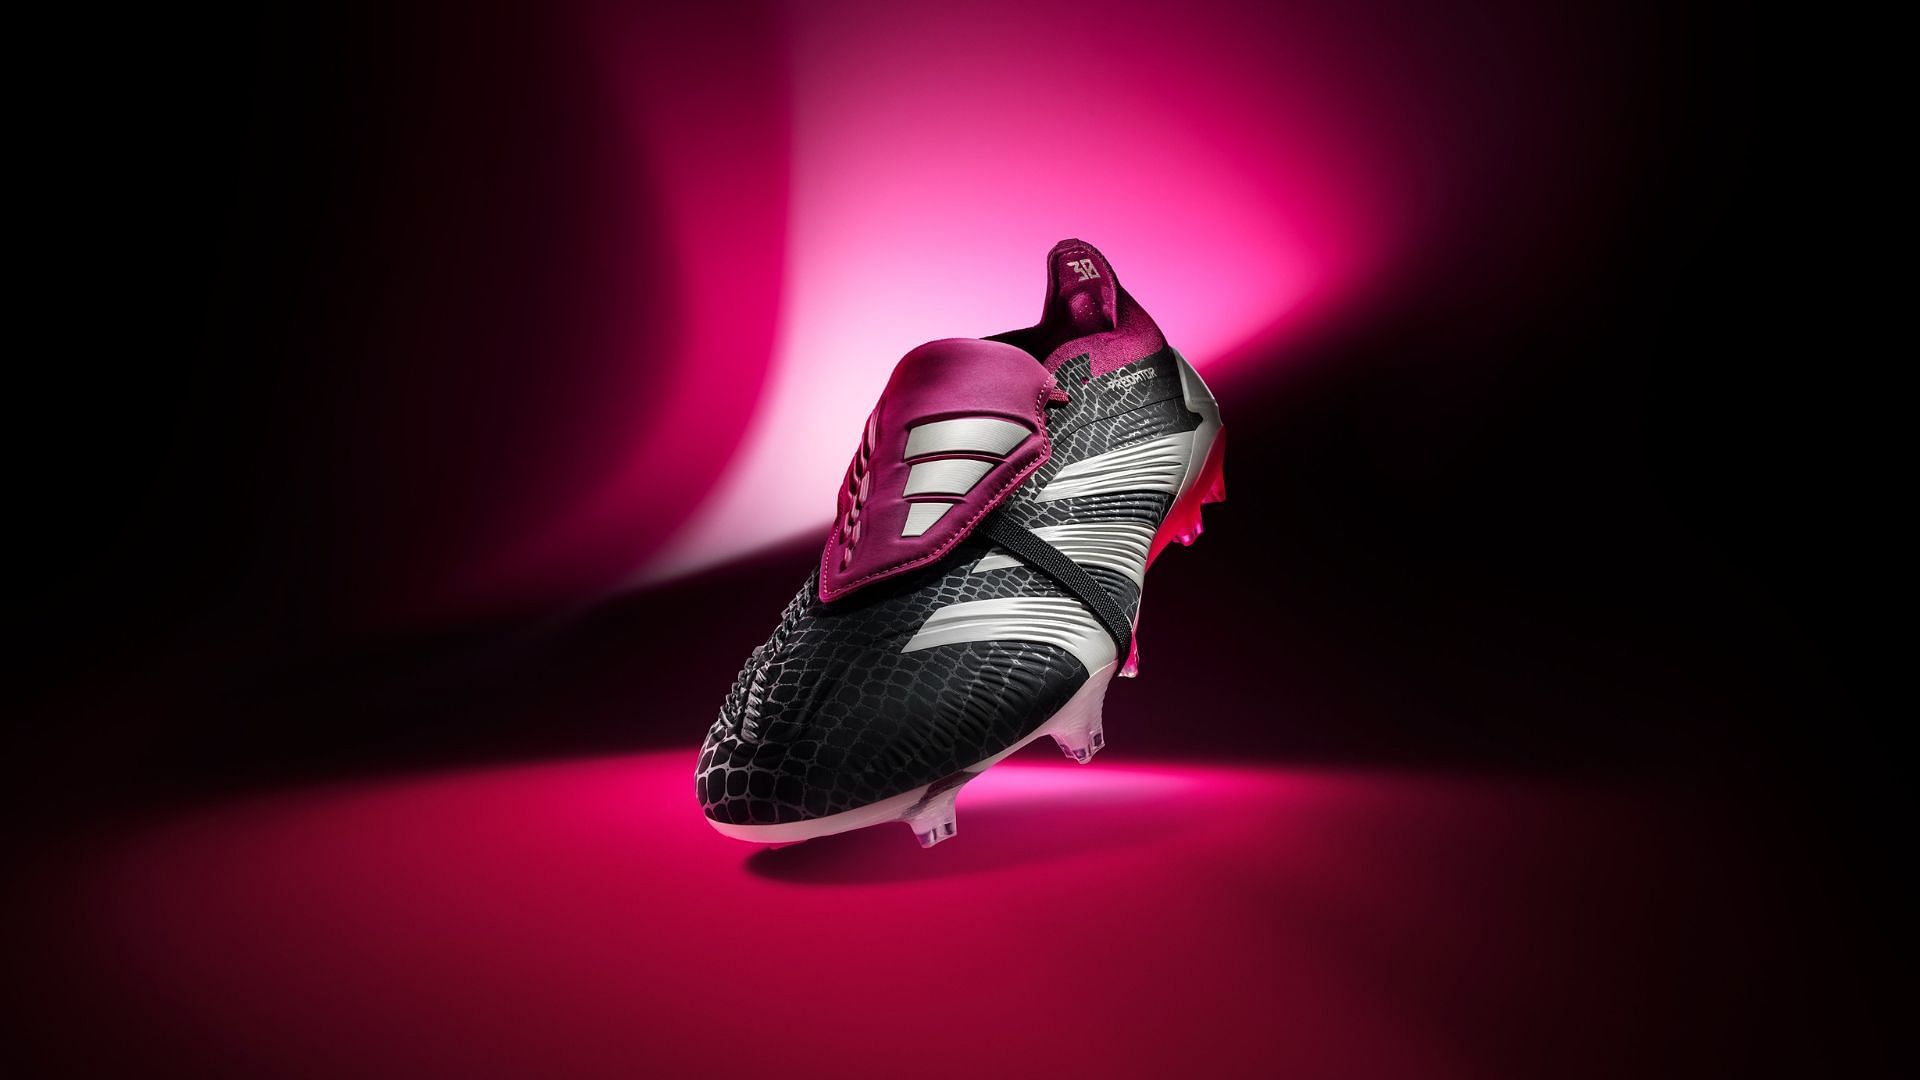 Adidas Predator Elite FT Firm Ground &quot;30 years&quot; Football Cleats (Image via Adidas)